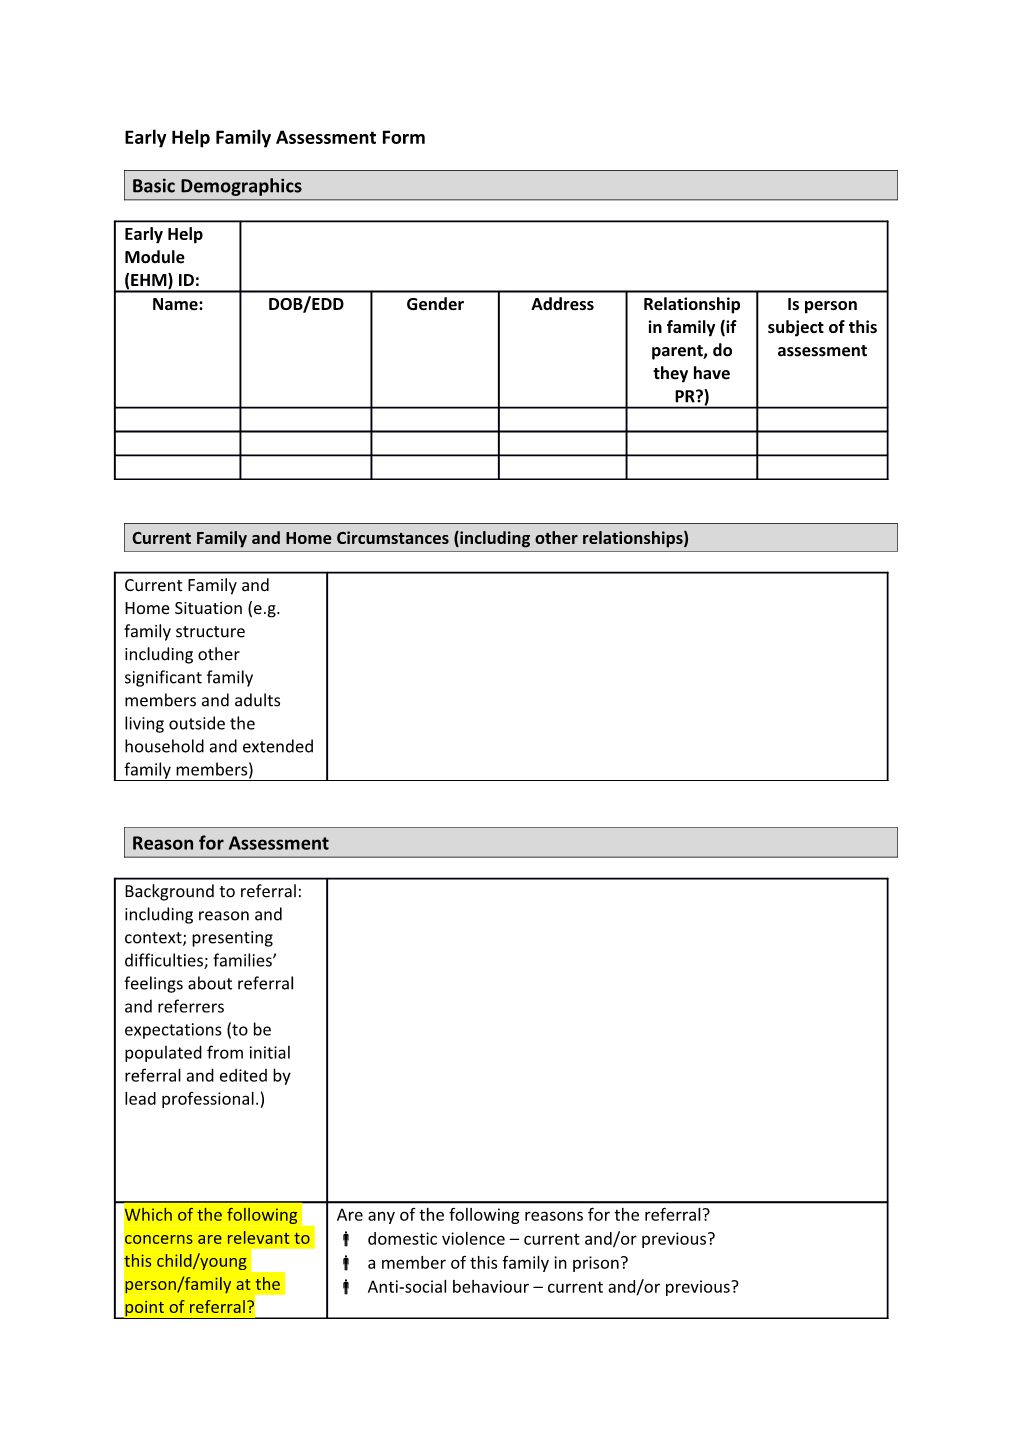 Early Help Family Assessment Form